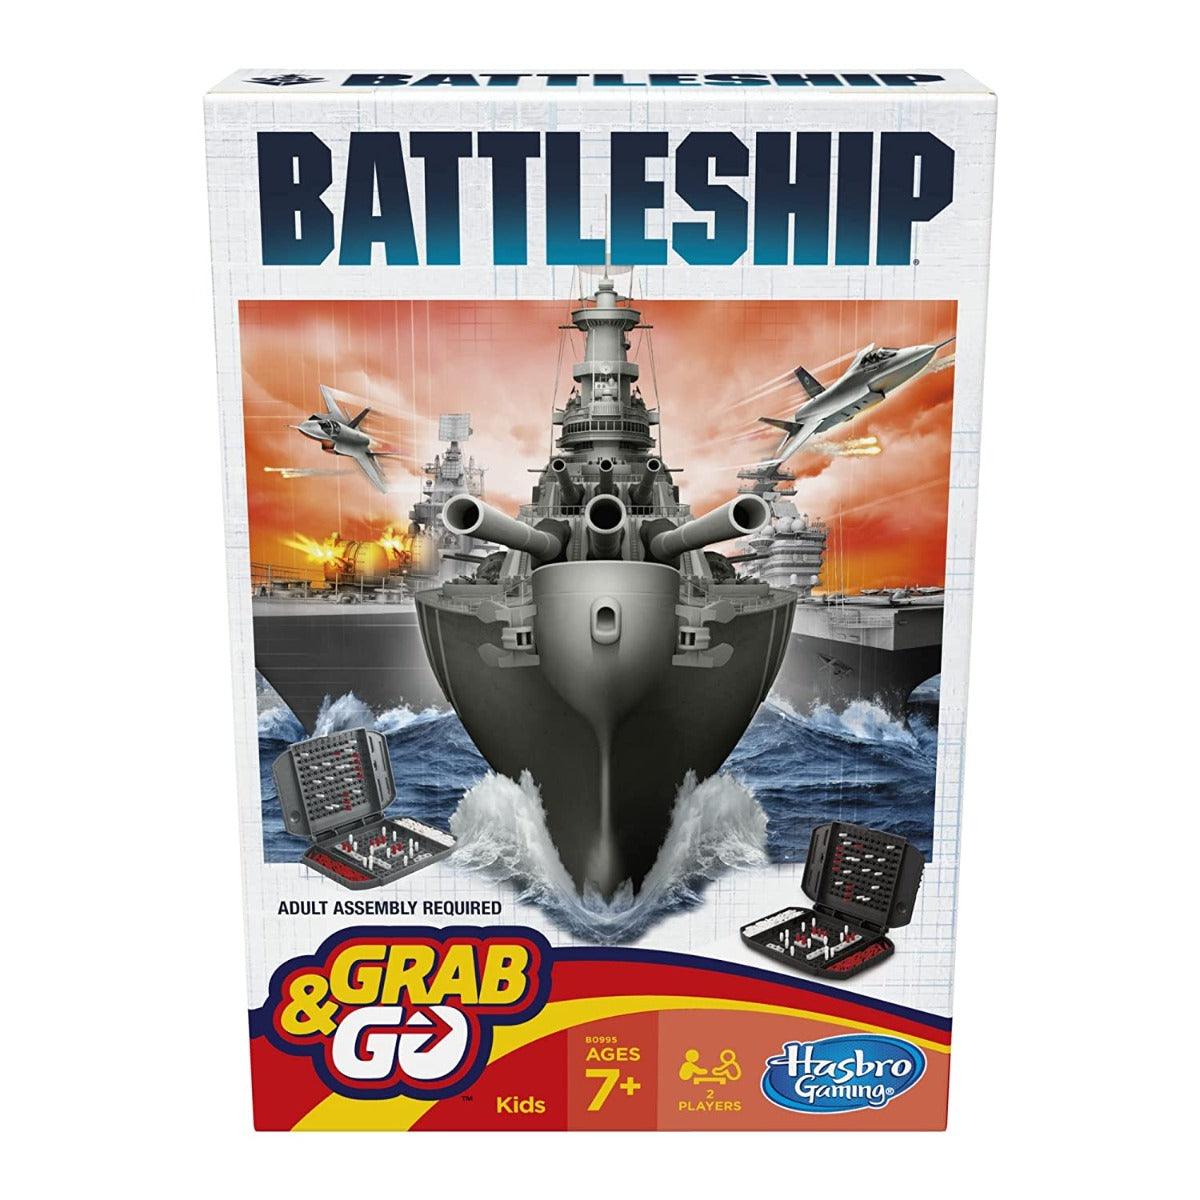 Hasbro Gaming Battleship Grab and Go Game - Portable 2 Player Game for Ages 7 and Up